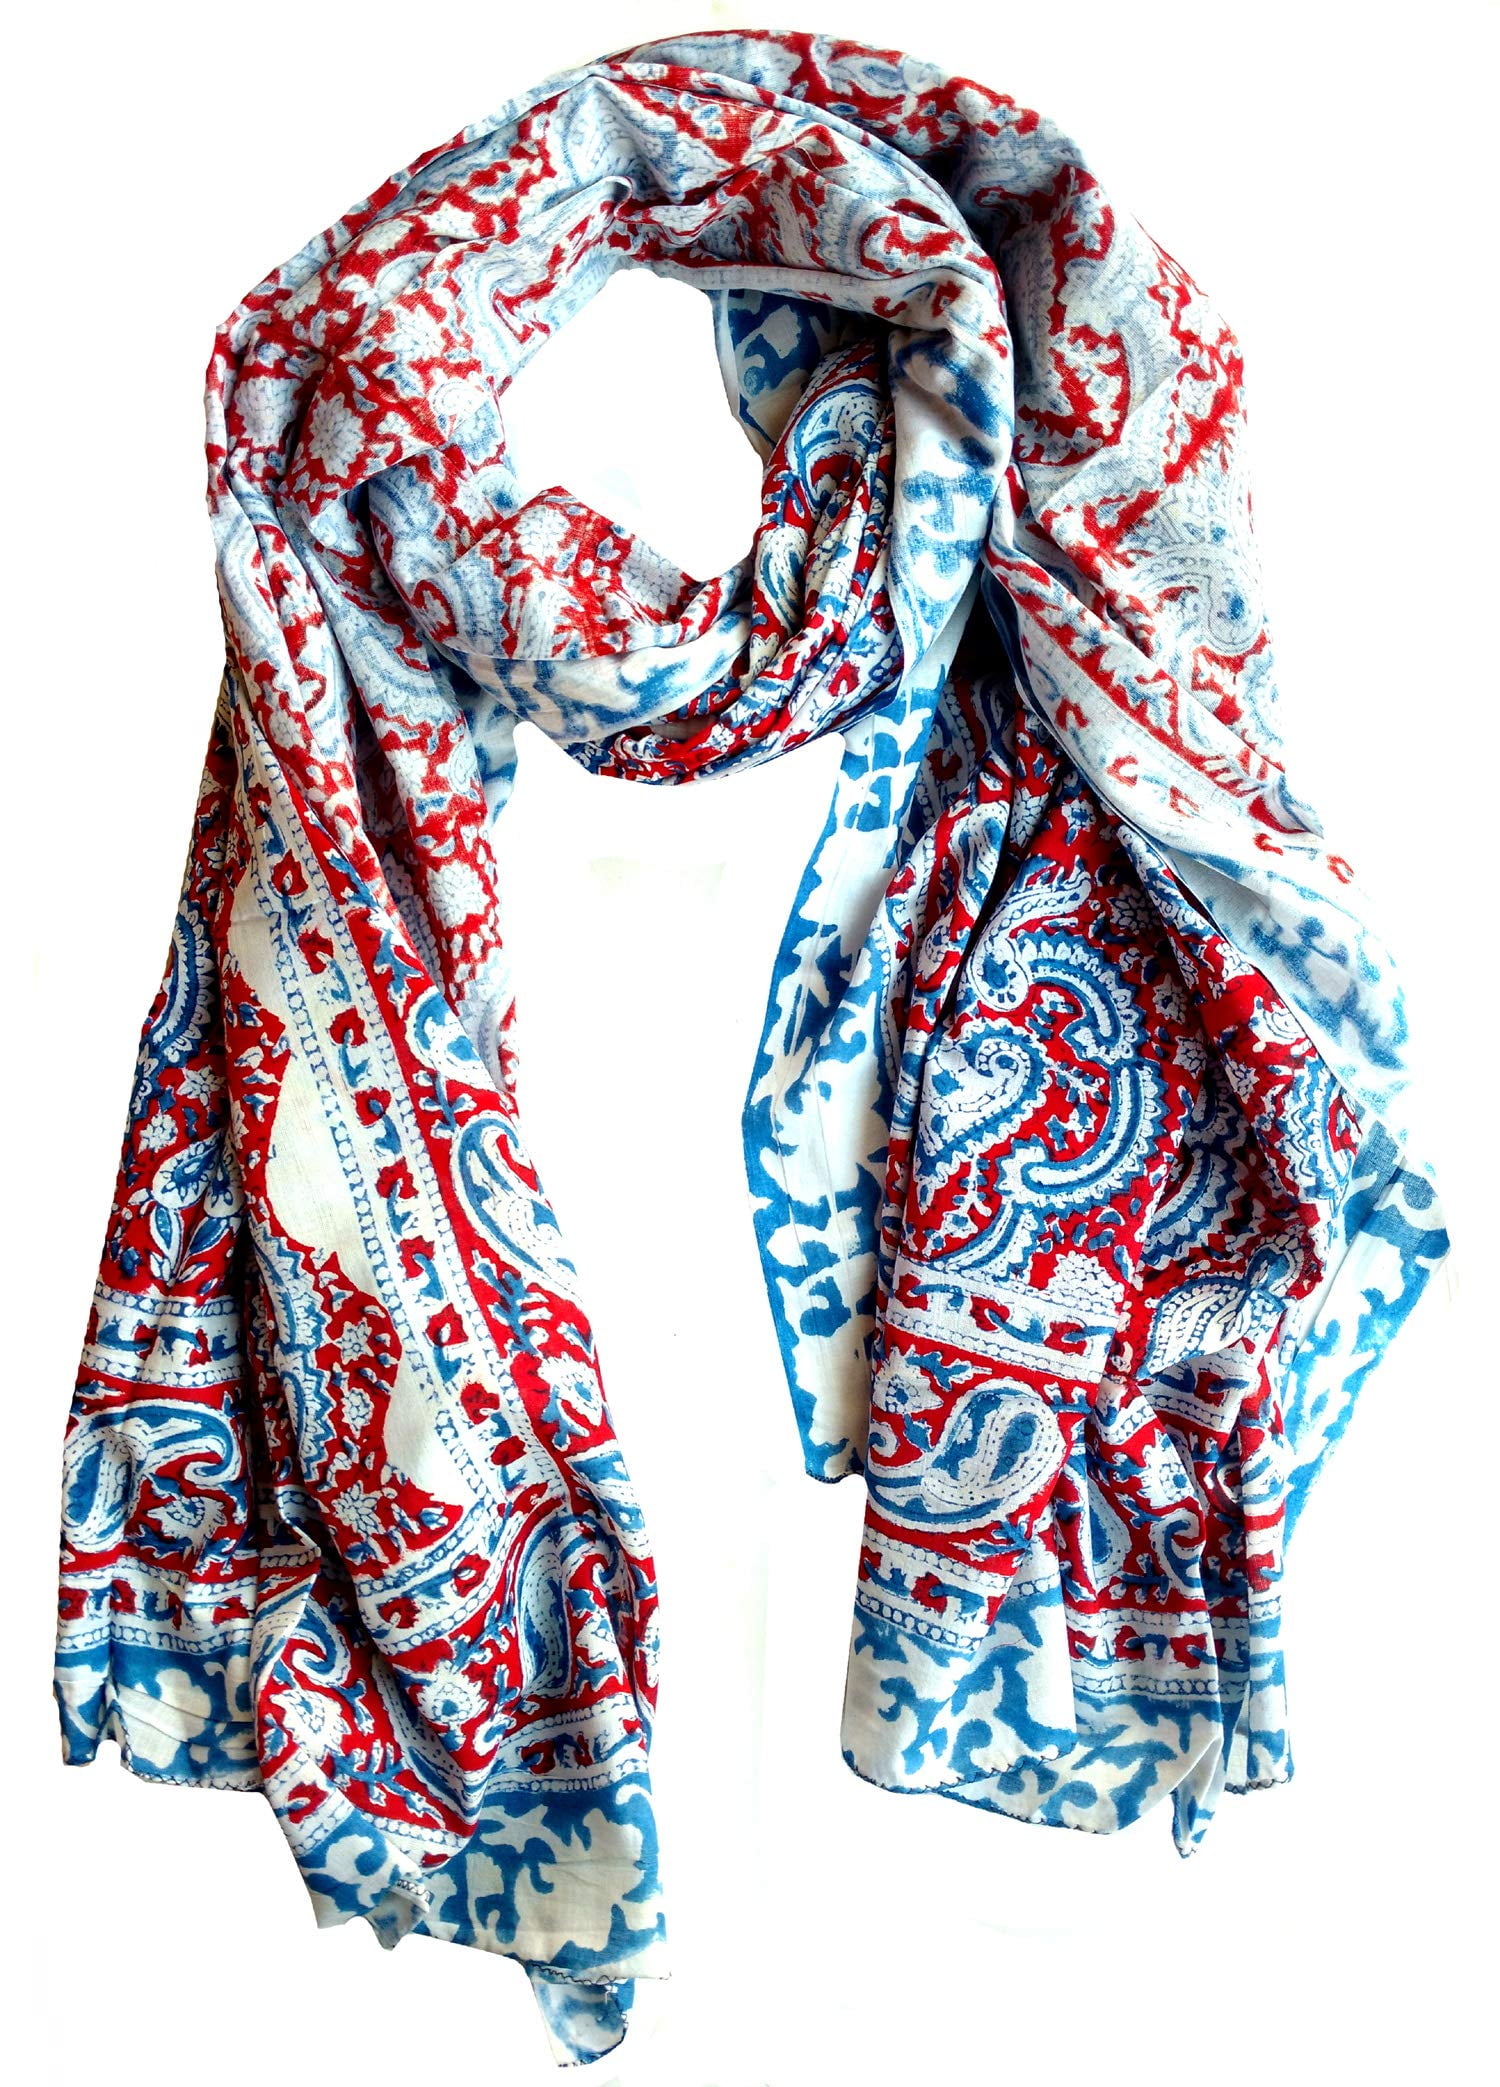 Rastogi Handcrafts 100% cotton Hand block rajasthani print scarves for women 73x44 inch size scarfs use as also sarong